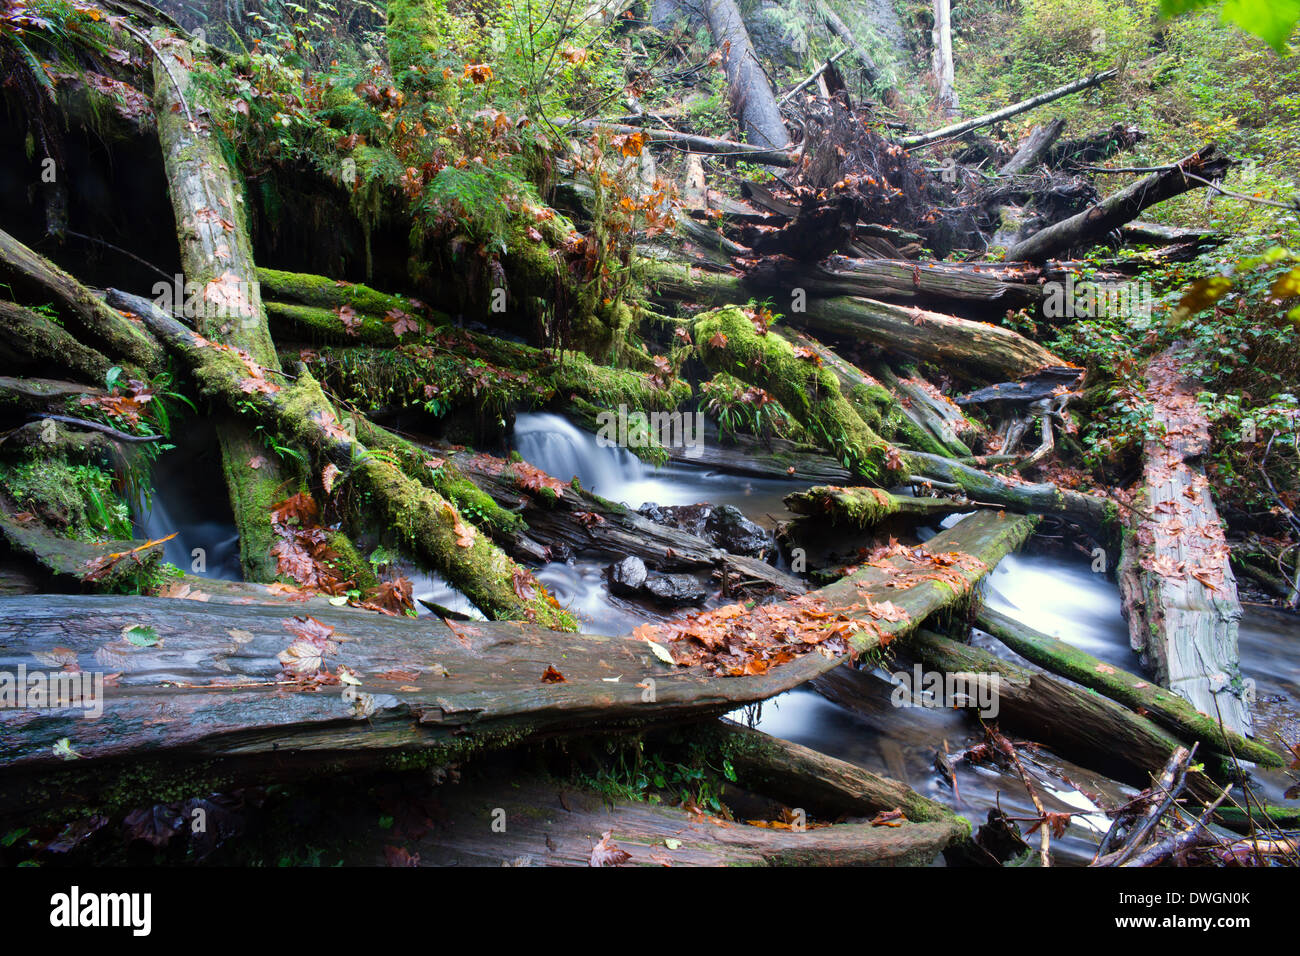 A stream makes it's way through the fallen trees in the forest Stock Photo